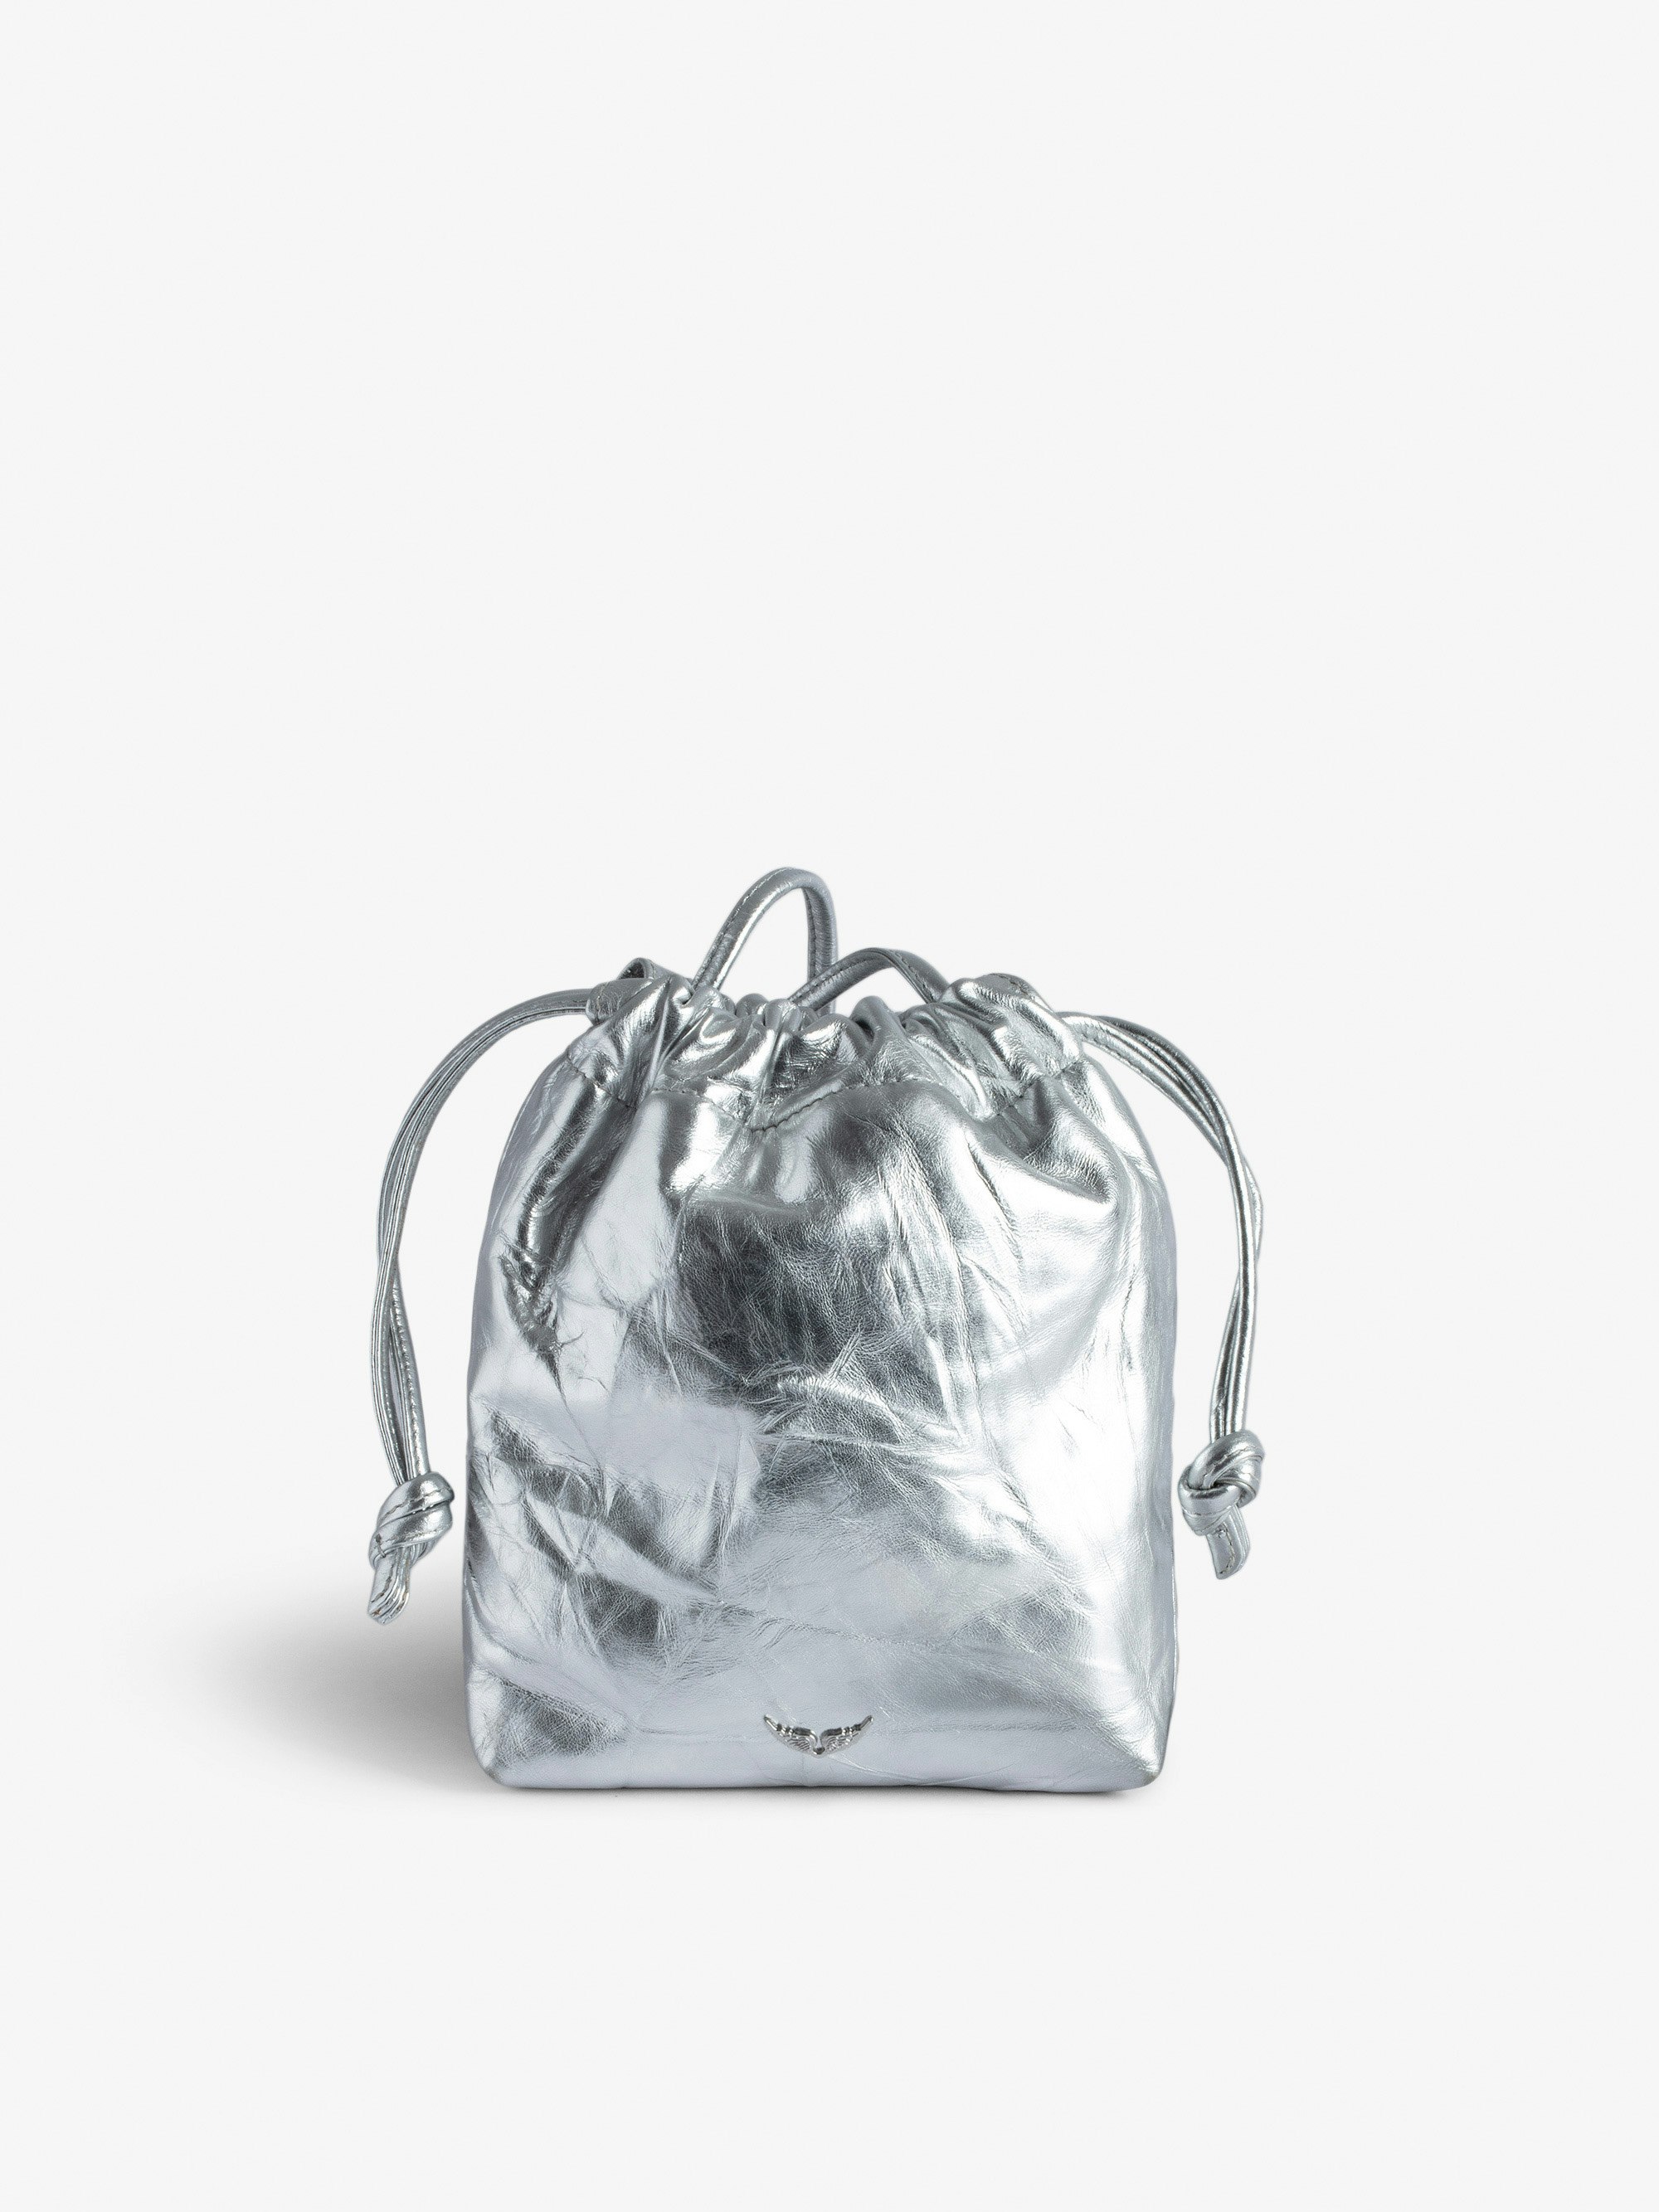 Rock To Go Metallic Bag - Women’s small bucket bag in metallic silver leather with drawstring and shoulder strap.